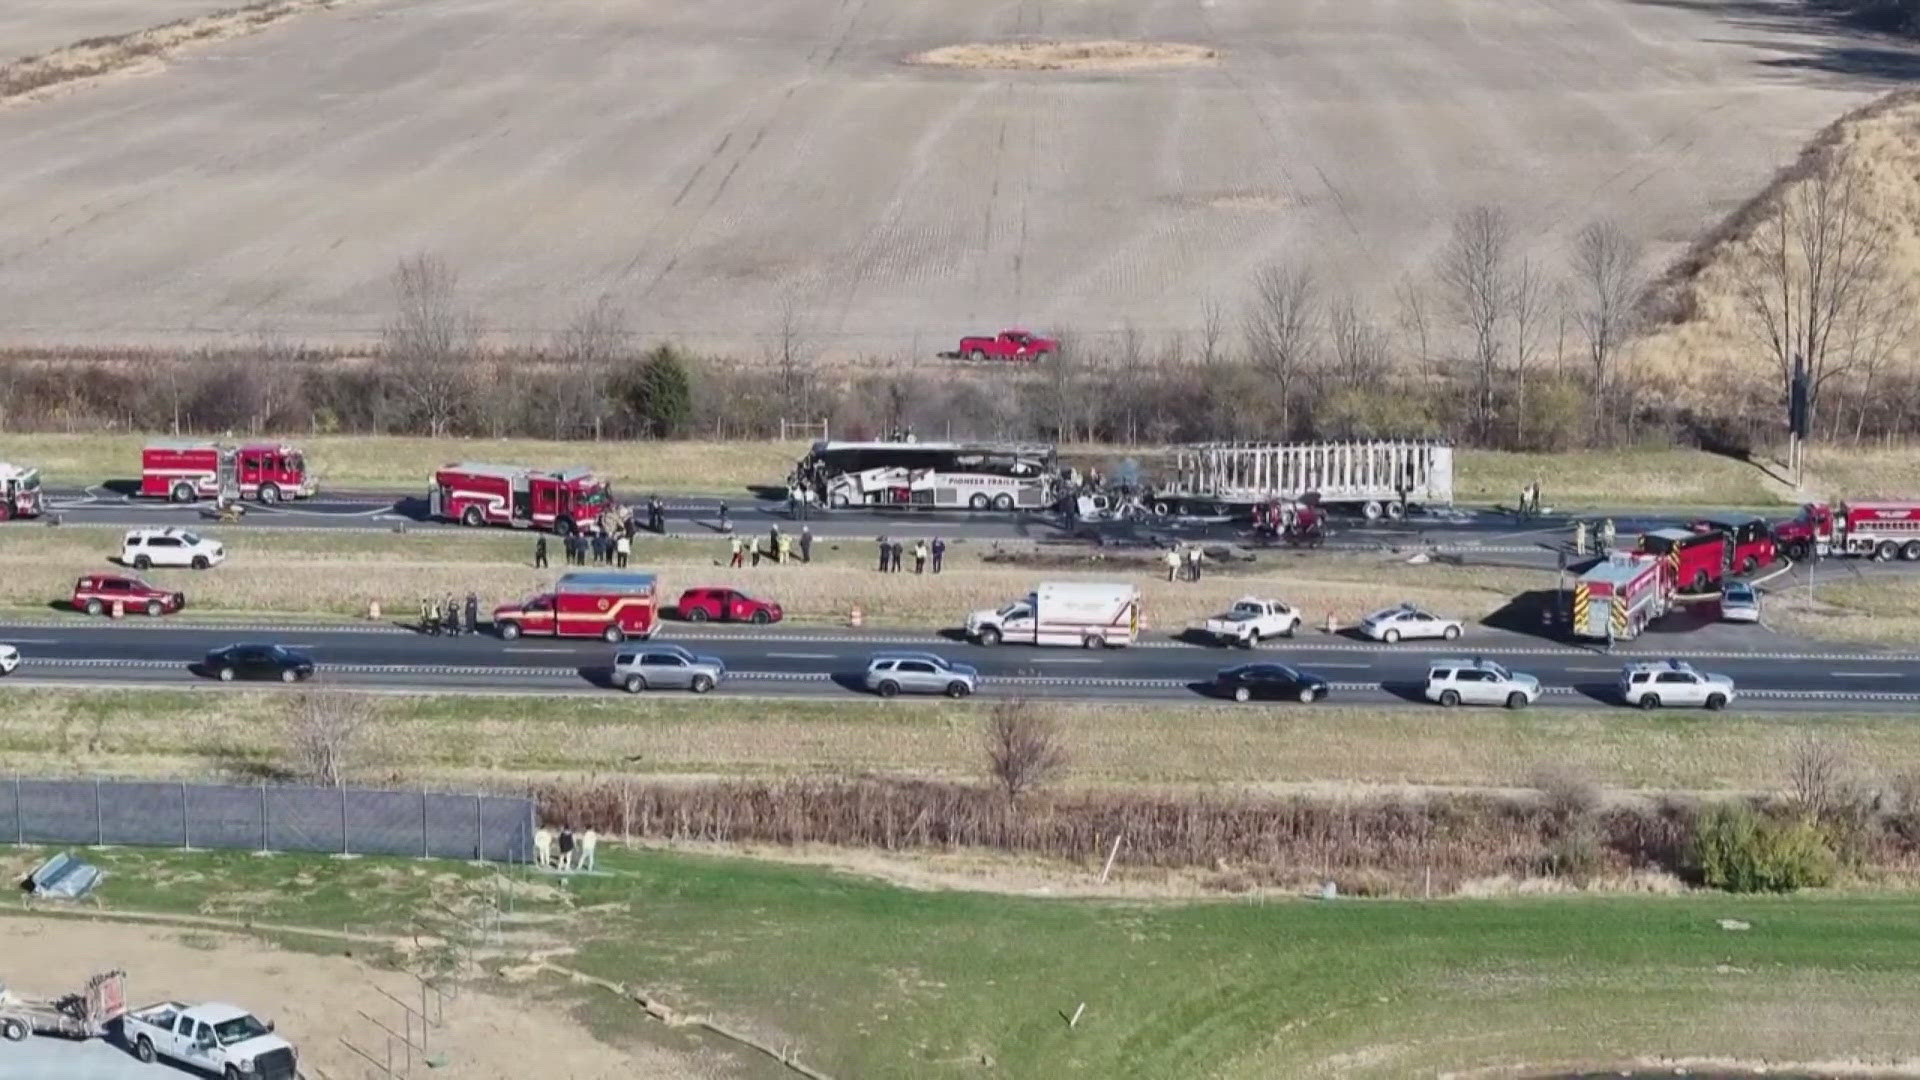 Six people died and 18 others were injured when a semi smashed into an SUV and a charter bus on Interstate 70 in Licking County last November.